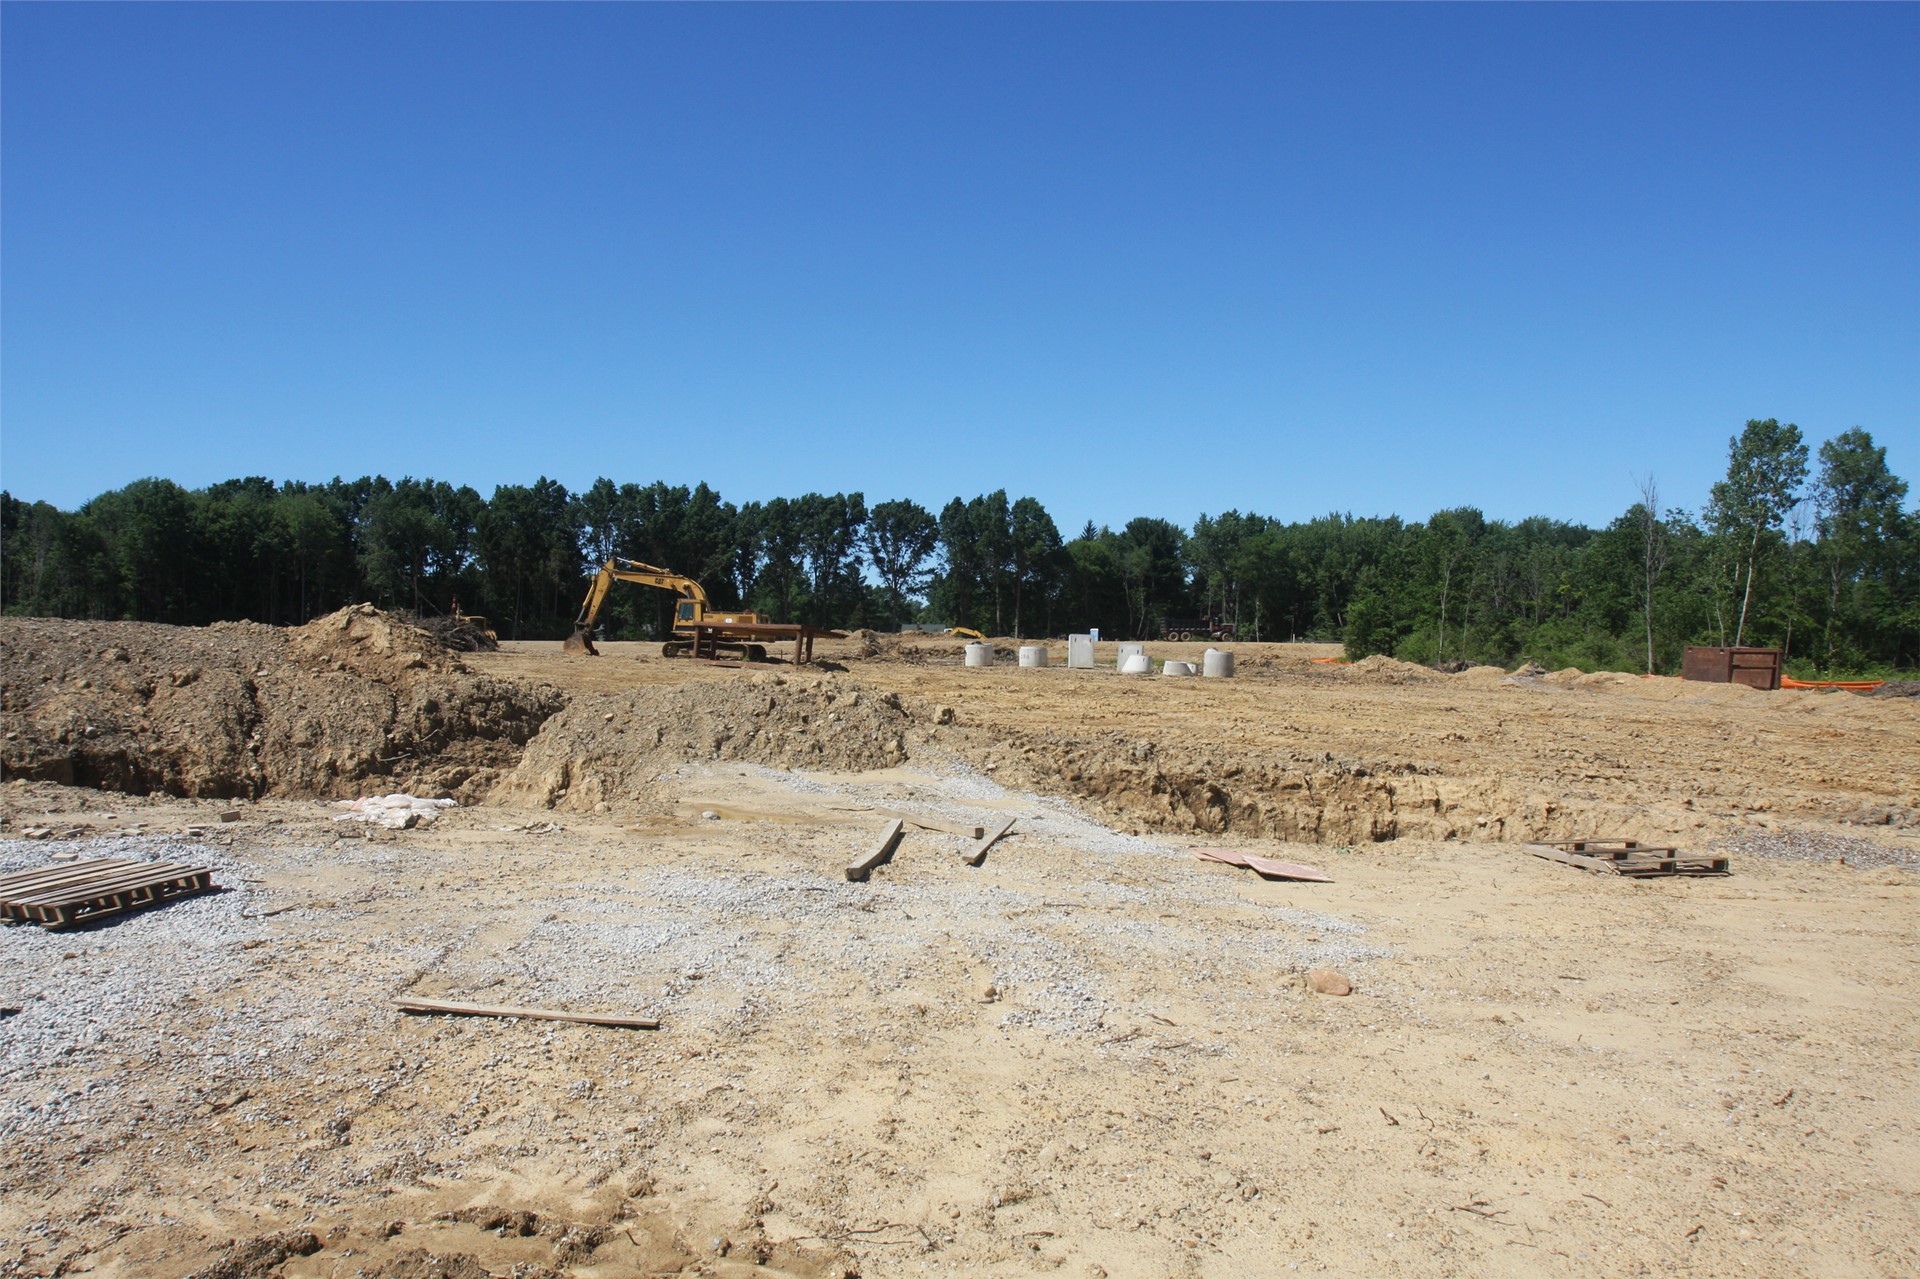 View of parking lot area (High School will sit along tree line, beyond construction vehicle)